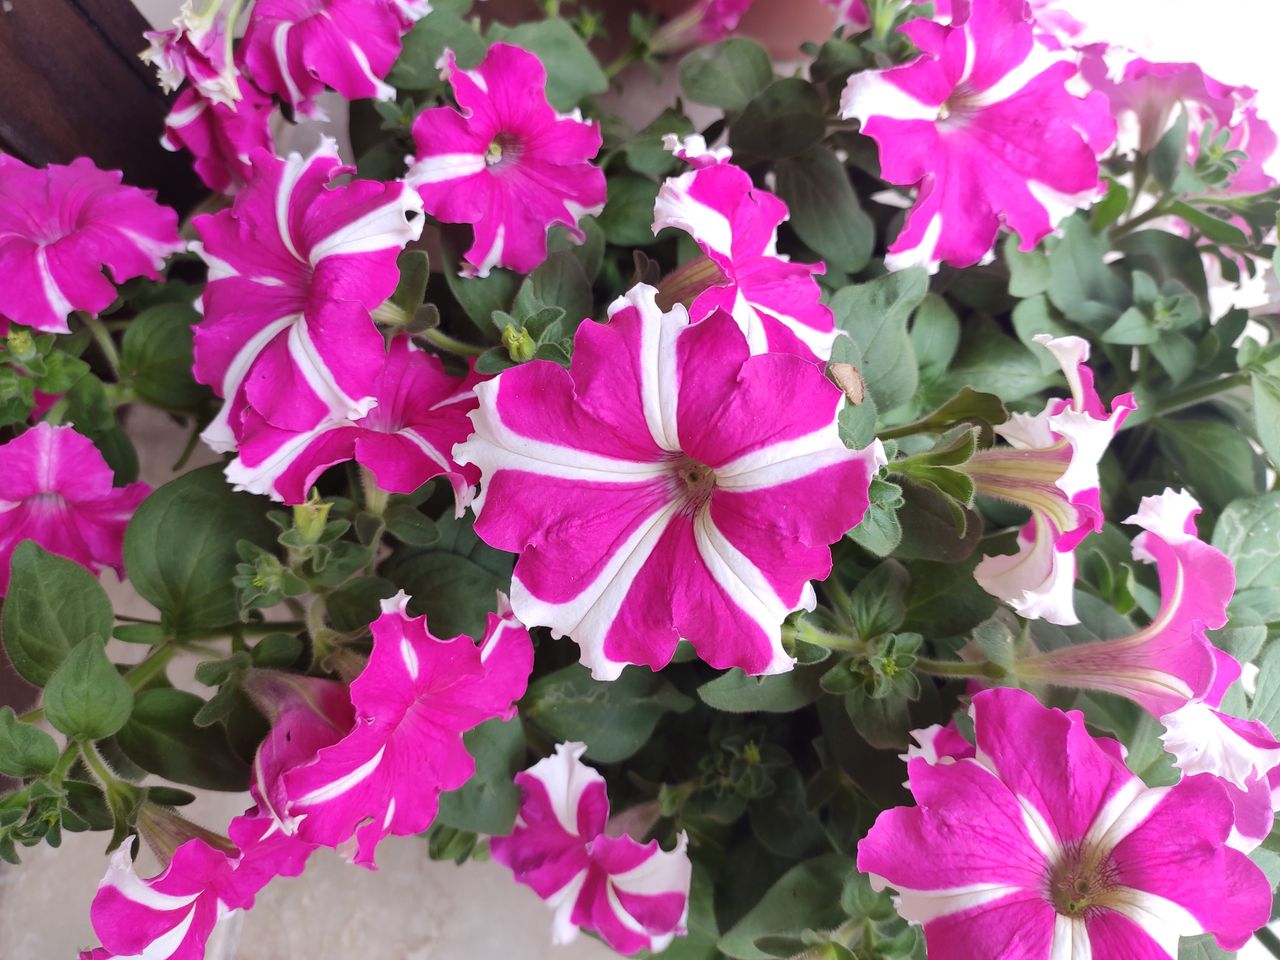 Petunias will adorn gardens and balconies for several months